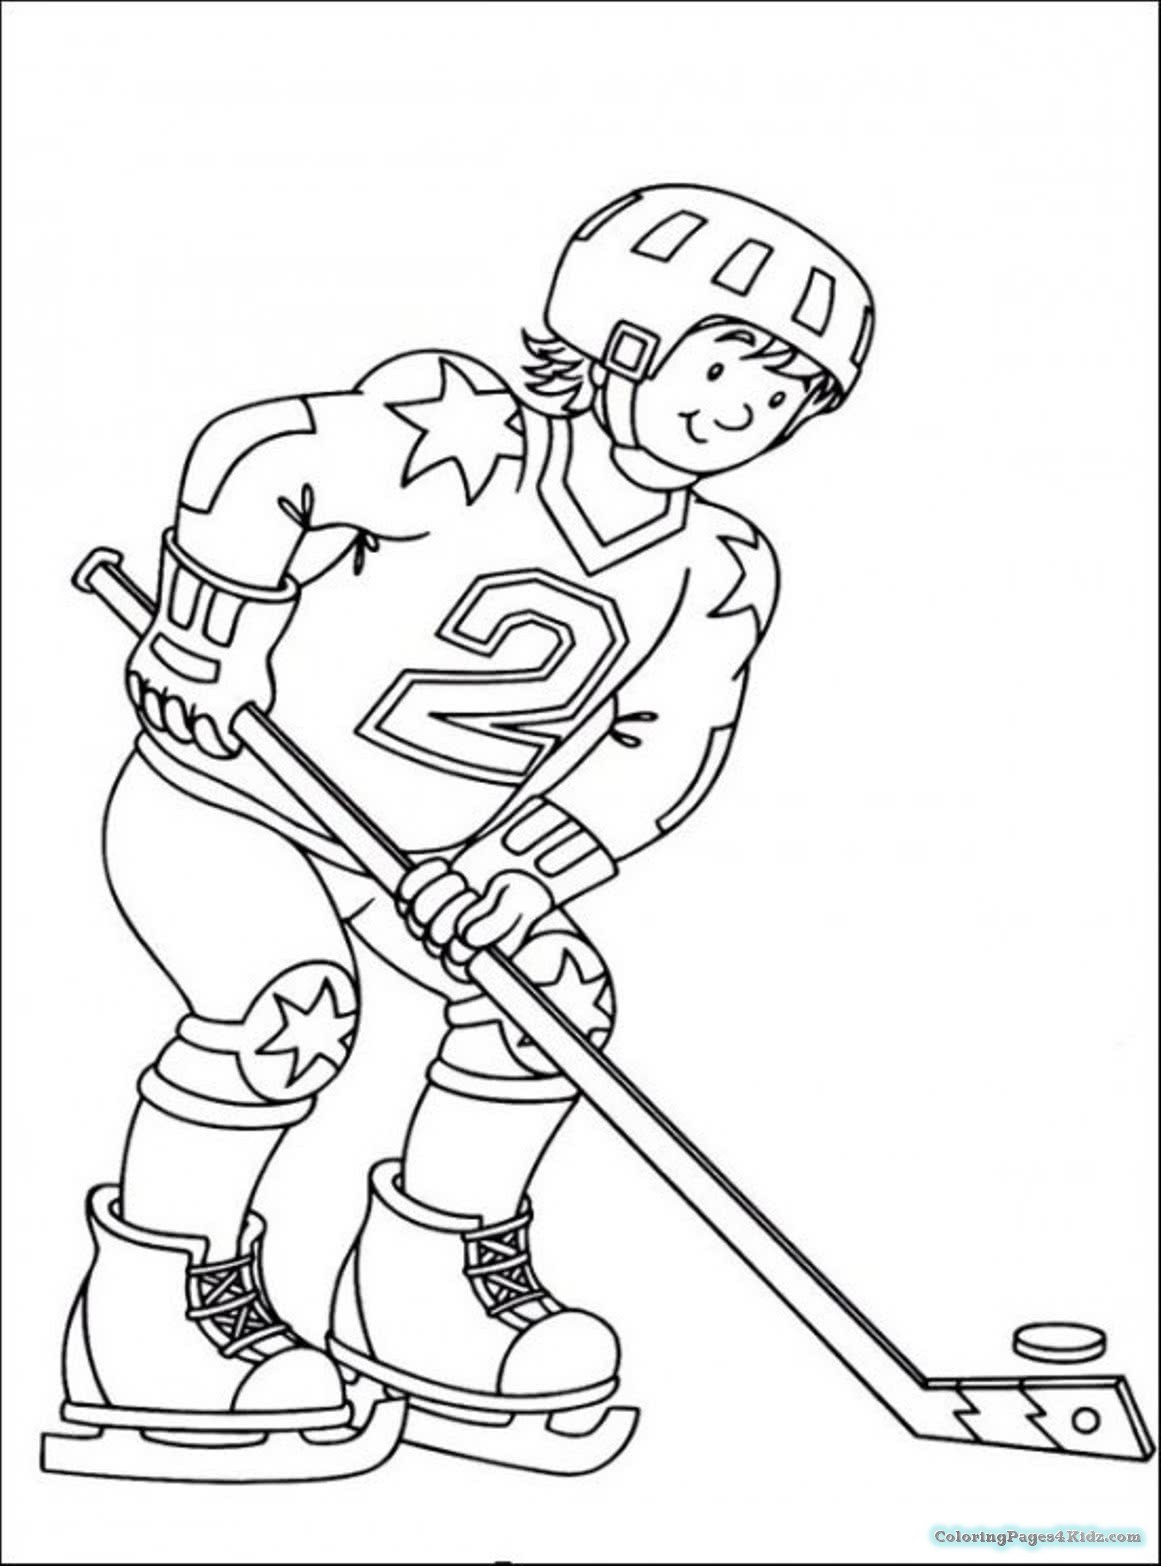 Ice Hockey Coloring Pages at GetColorings.com | Free printable